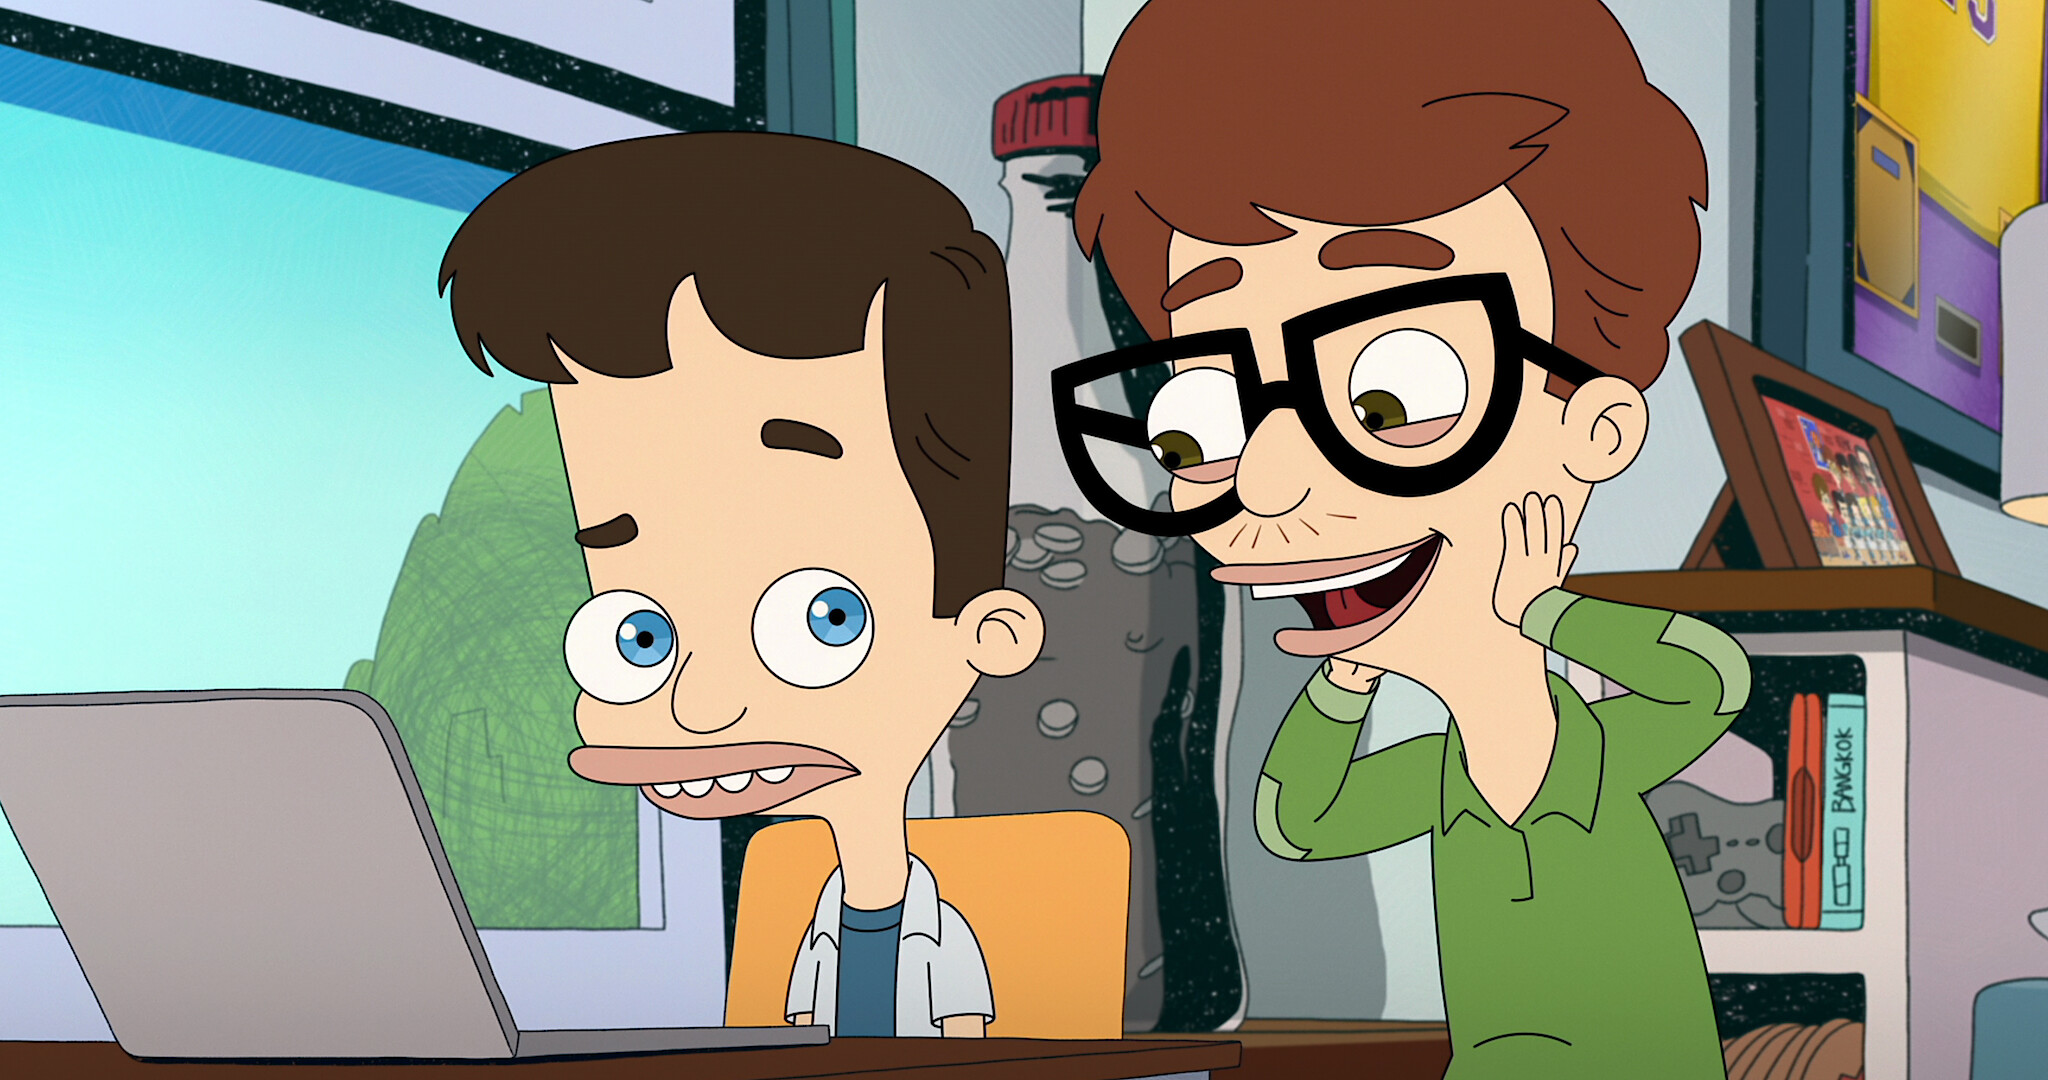 Unlock the Laughter Everything You Need to Know About Streaming 'Big Mouth' Season 7 on Netflix